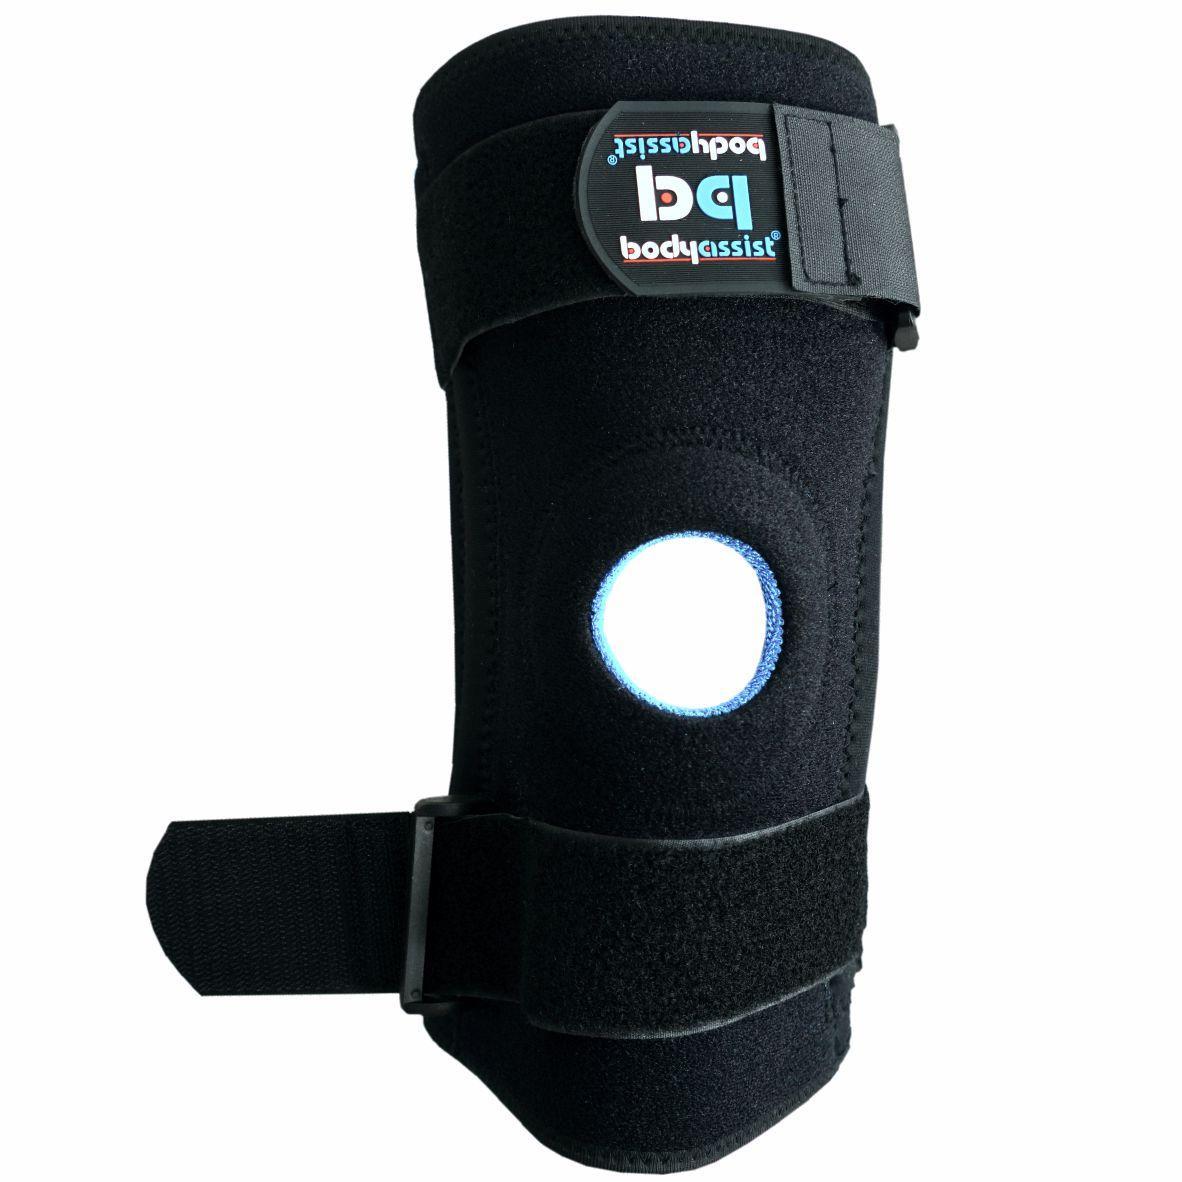 Bodyassist Patella Knee Support Brace with Stays BLACK EXTRA LARGE